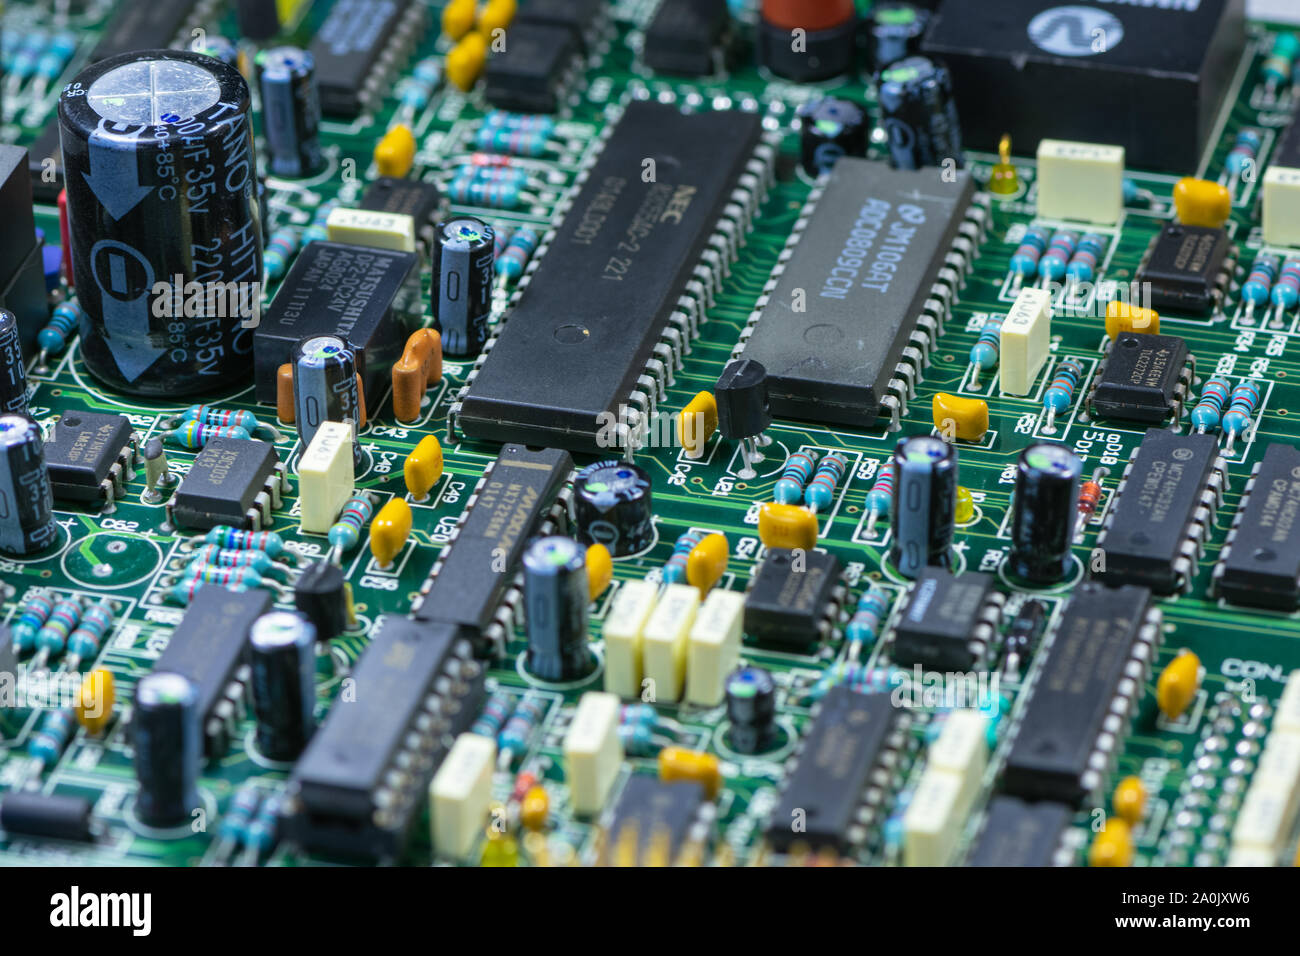 Close up shot of PCB unit with visible resistors, capacitors and micro procesors. Stock Photo